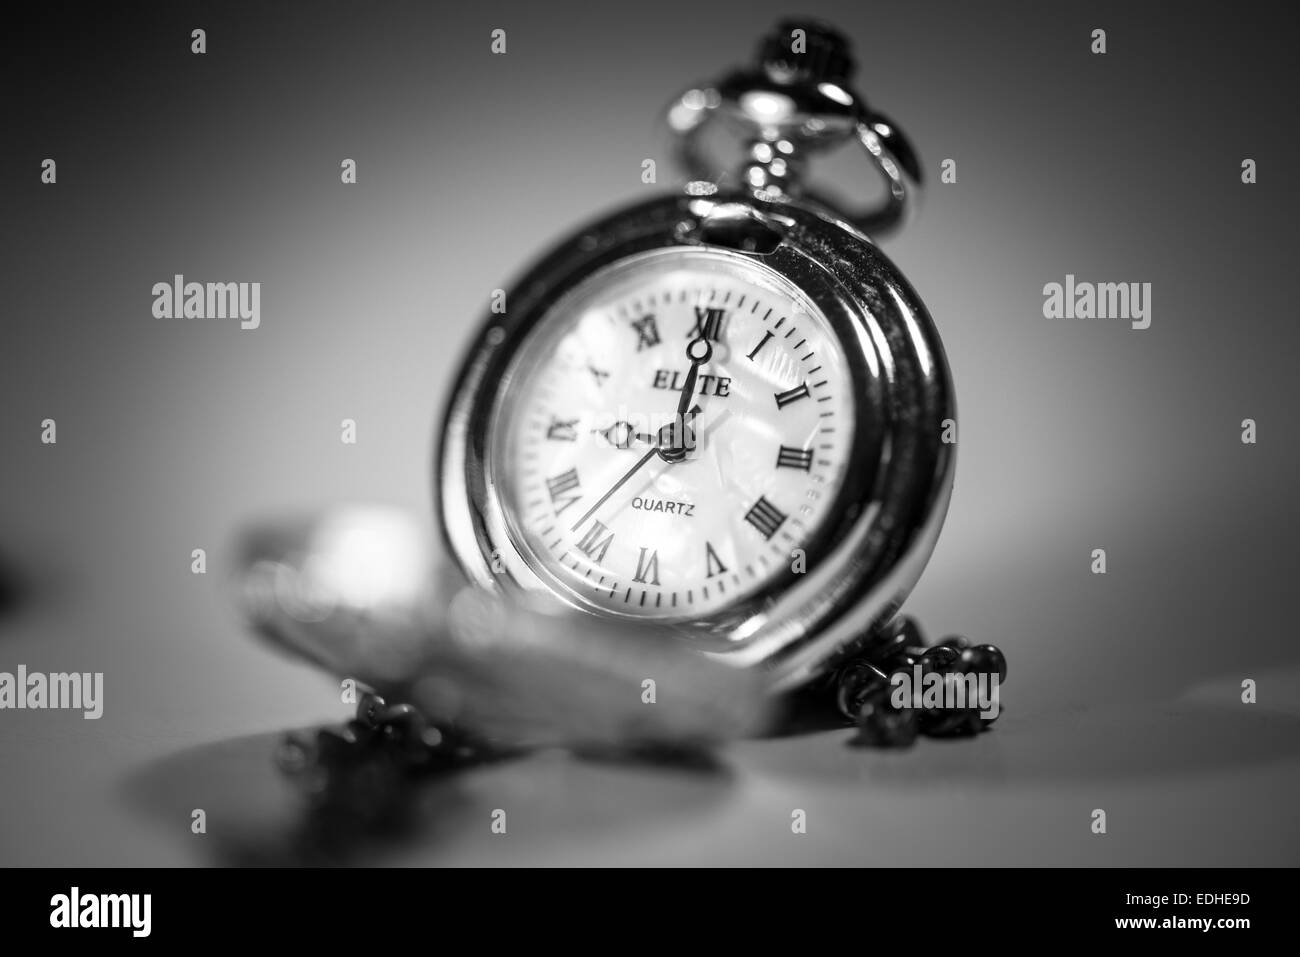 Real time map Black and White Stock Photos & Images - Alamy